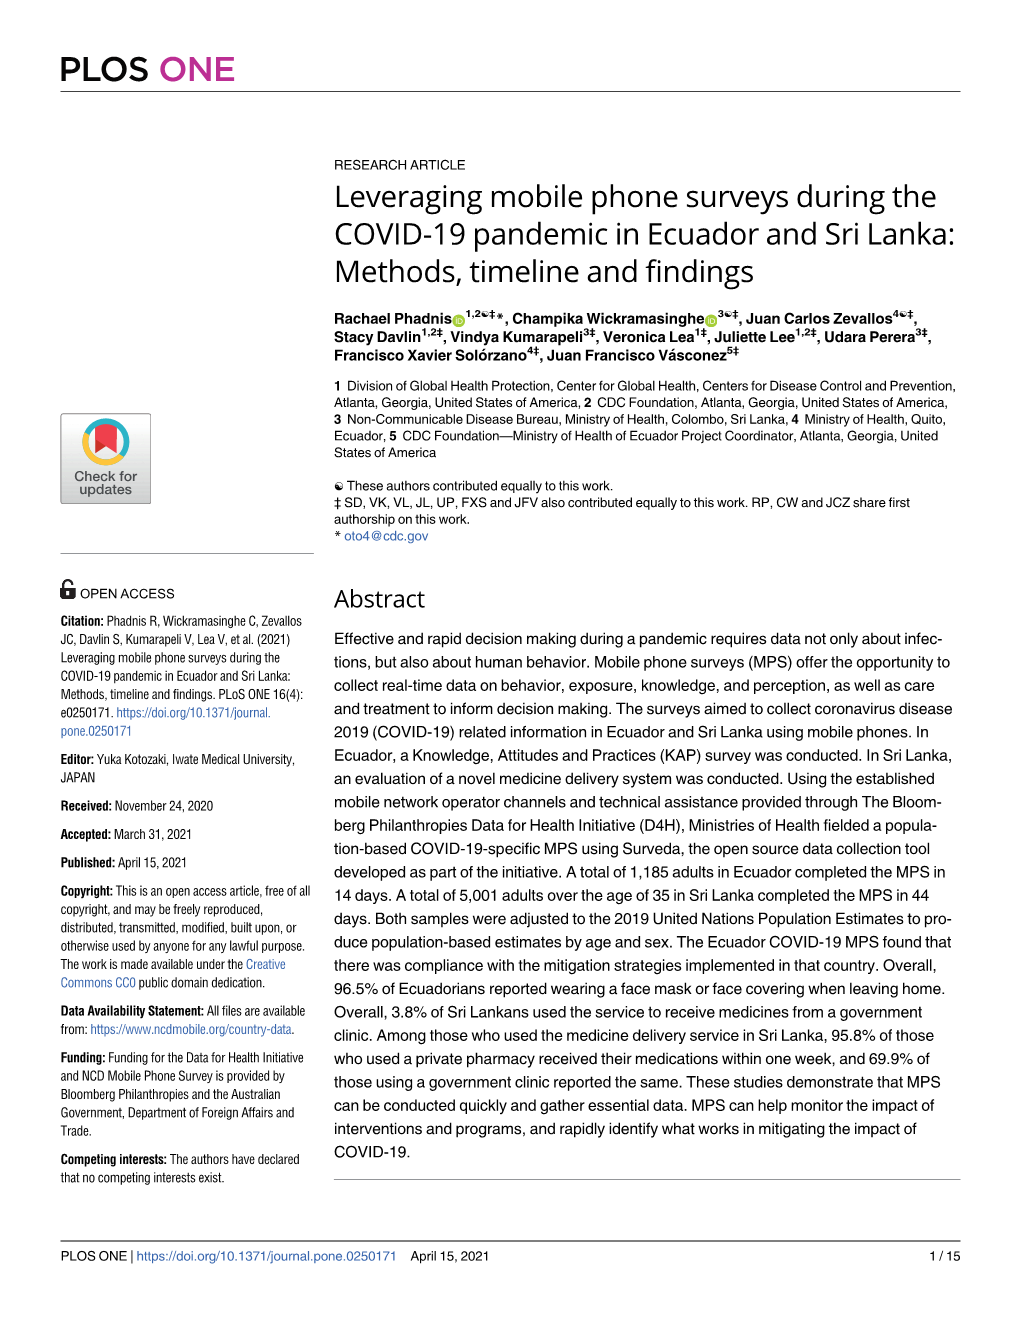 Leveraging Mobile Phone Surveys During the COVID-19 Pandemic in Ecuador and Sri Lanka: Methods, Timeline and Findings